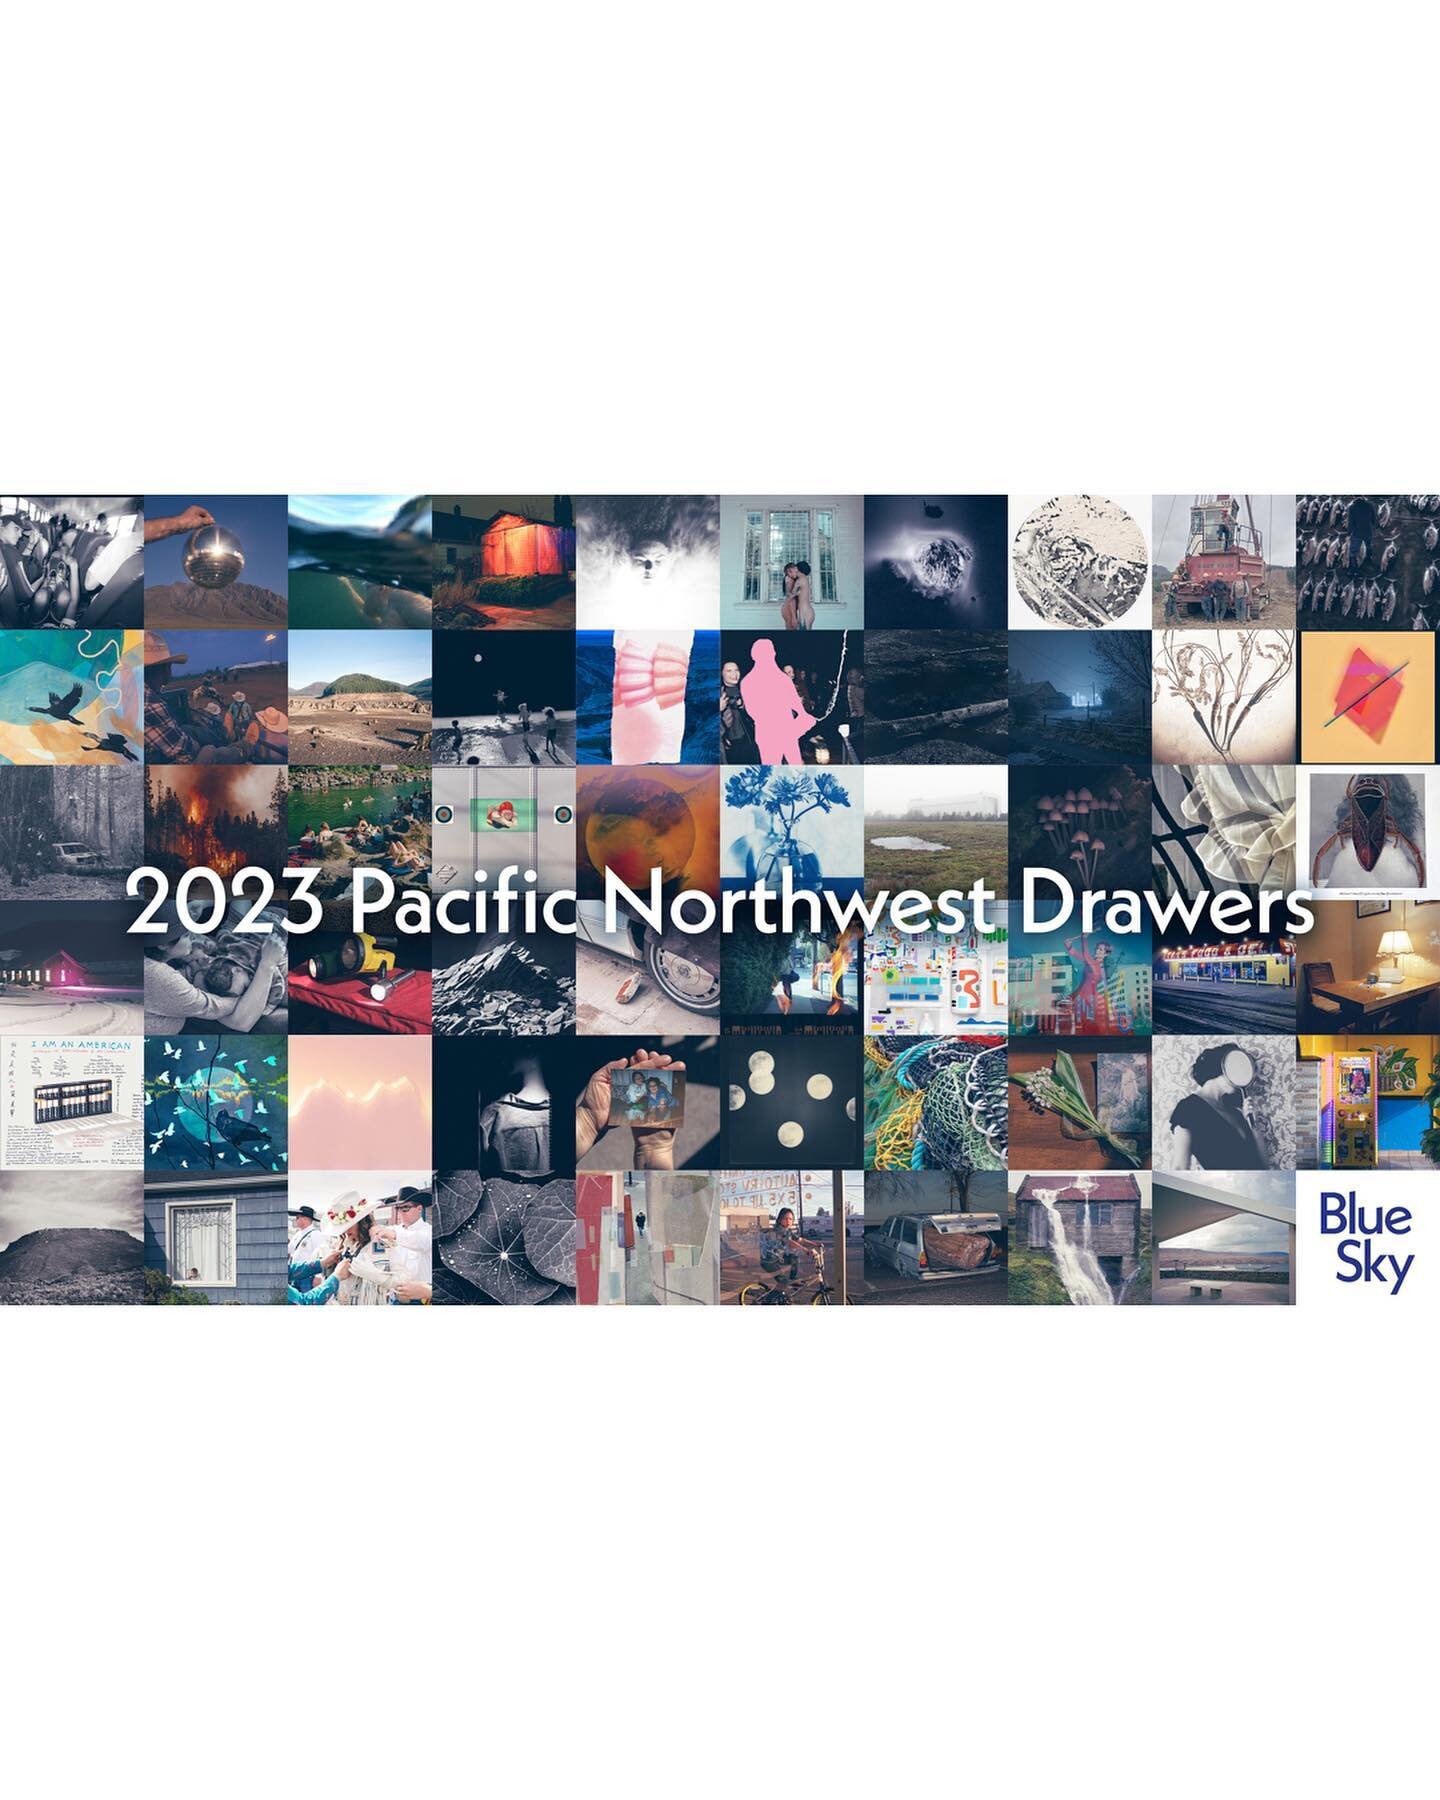 Honored that 10 photograph&rsquo;s from my ongoing Duwamish Remains (link in bio) project have been selected as part of @blueskygallerypdx annual 2023 Pacific Northwest Drawers. Also honored to be featured right next to @photocenternw friend and teac